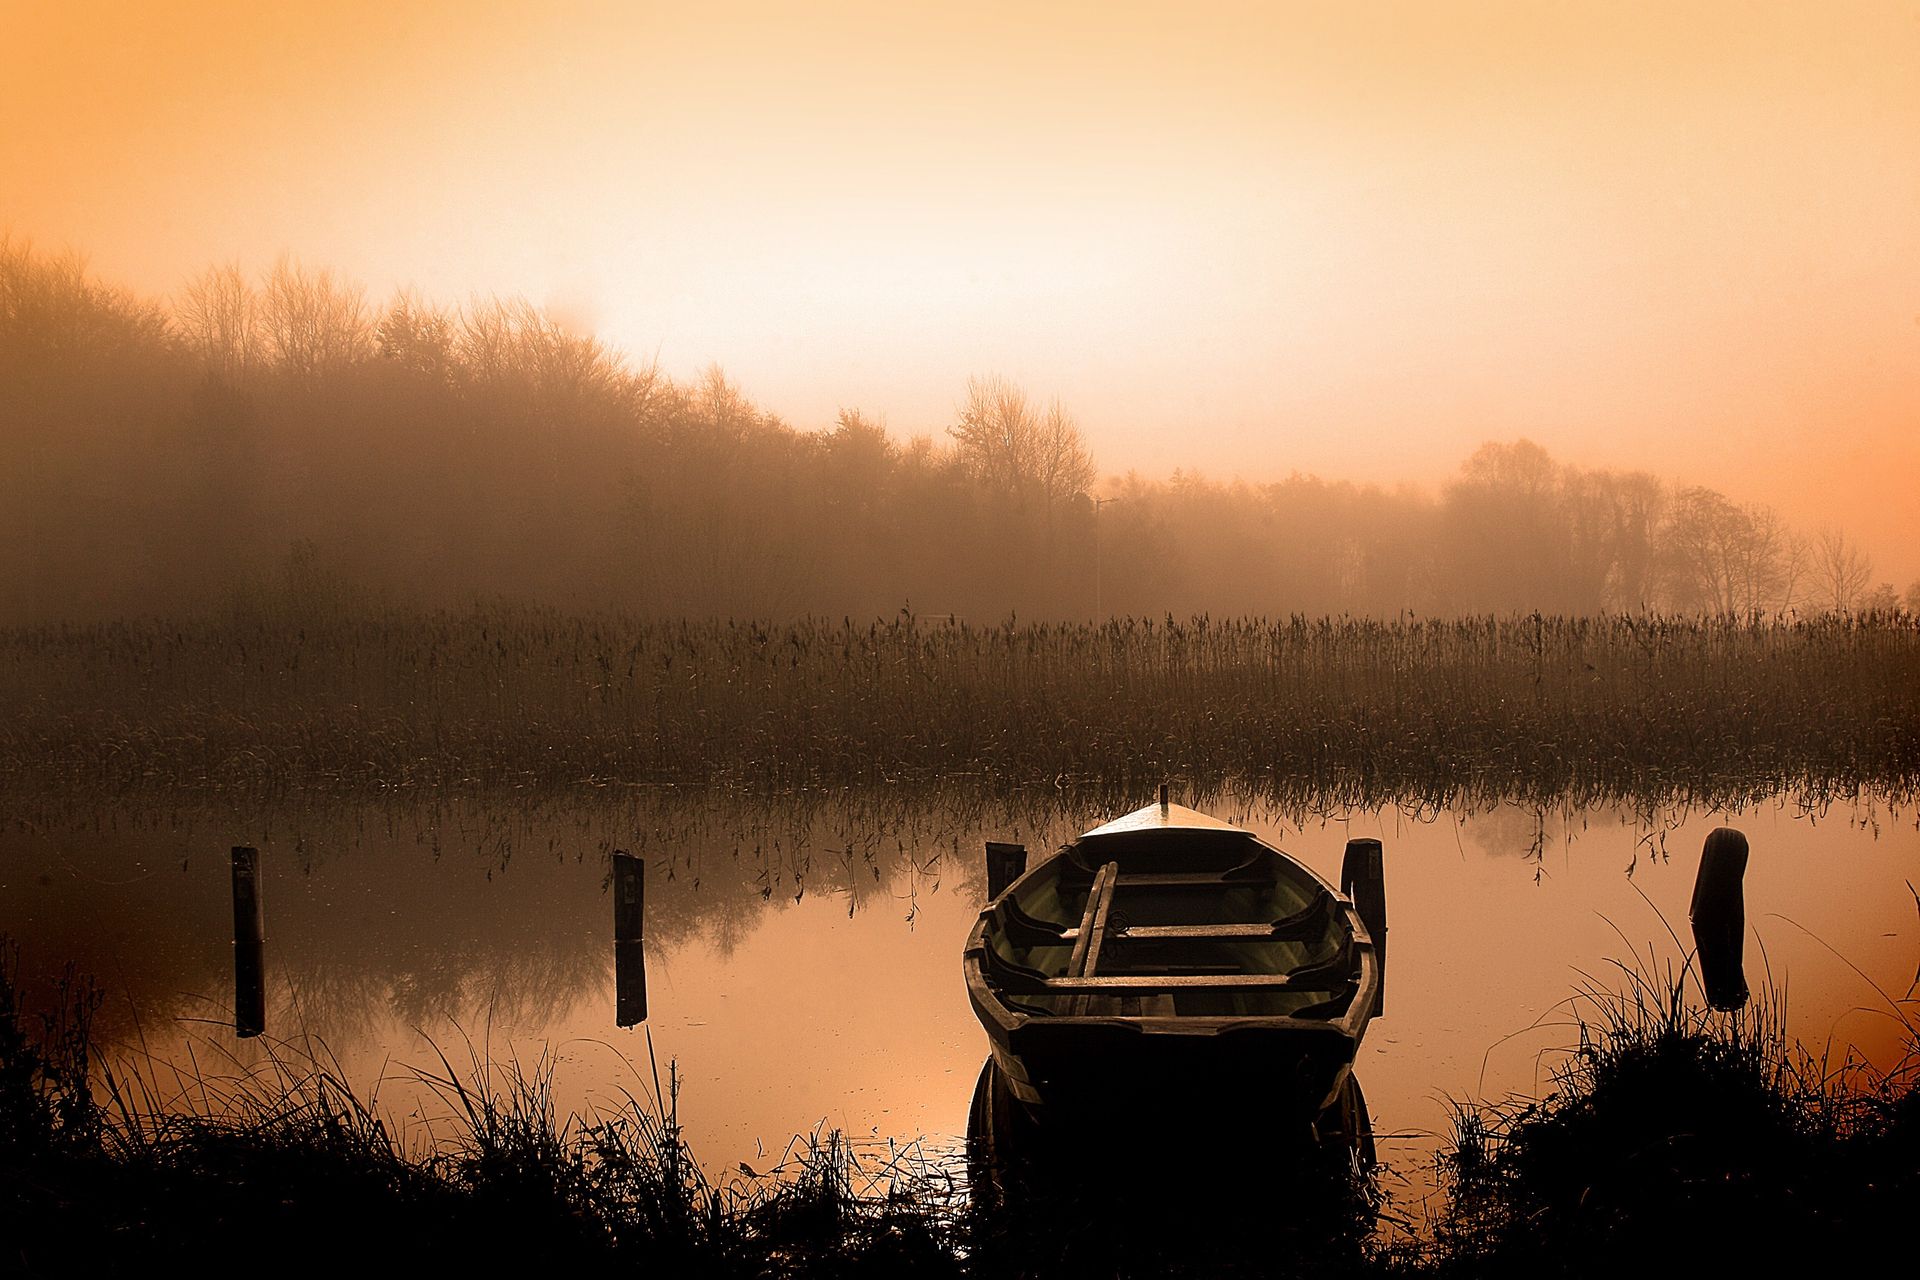 The sun rises over a lake with a rowboat.